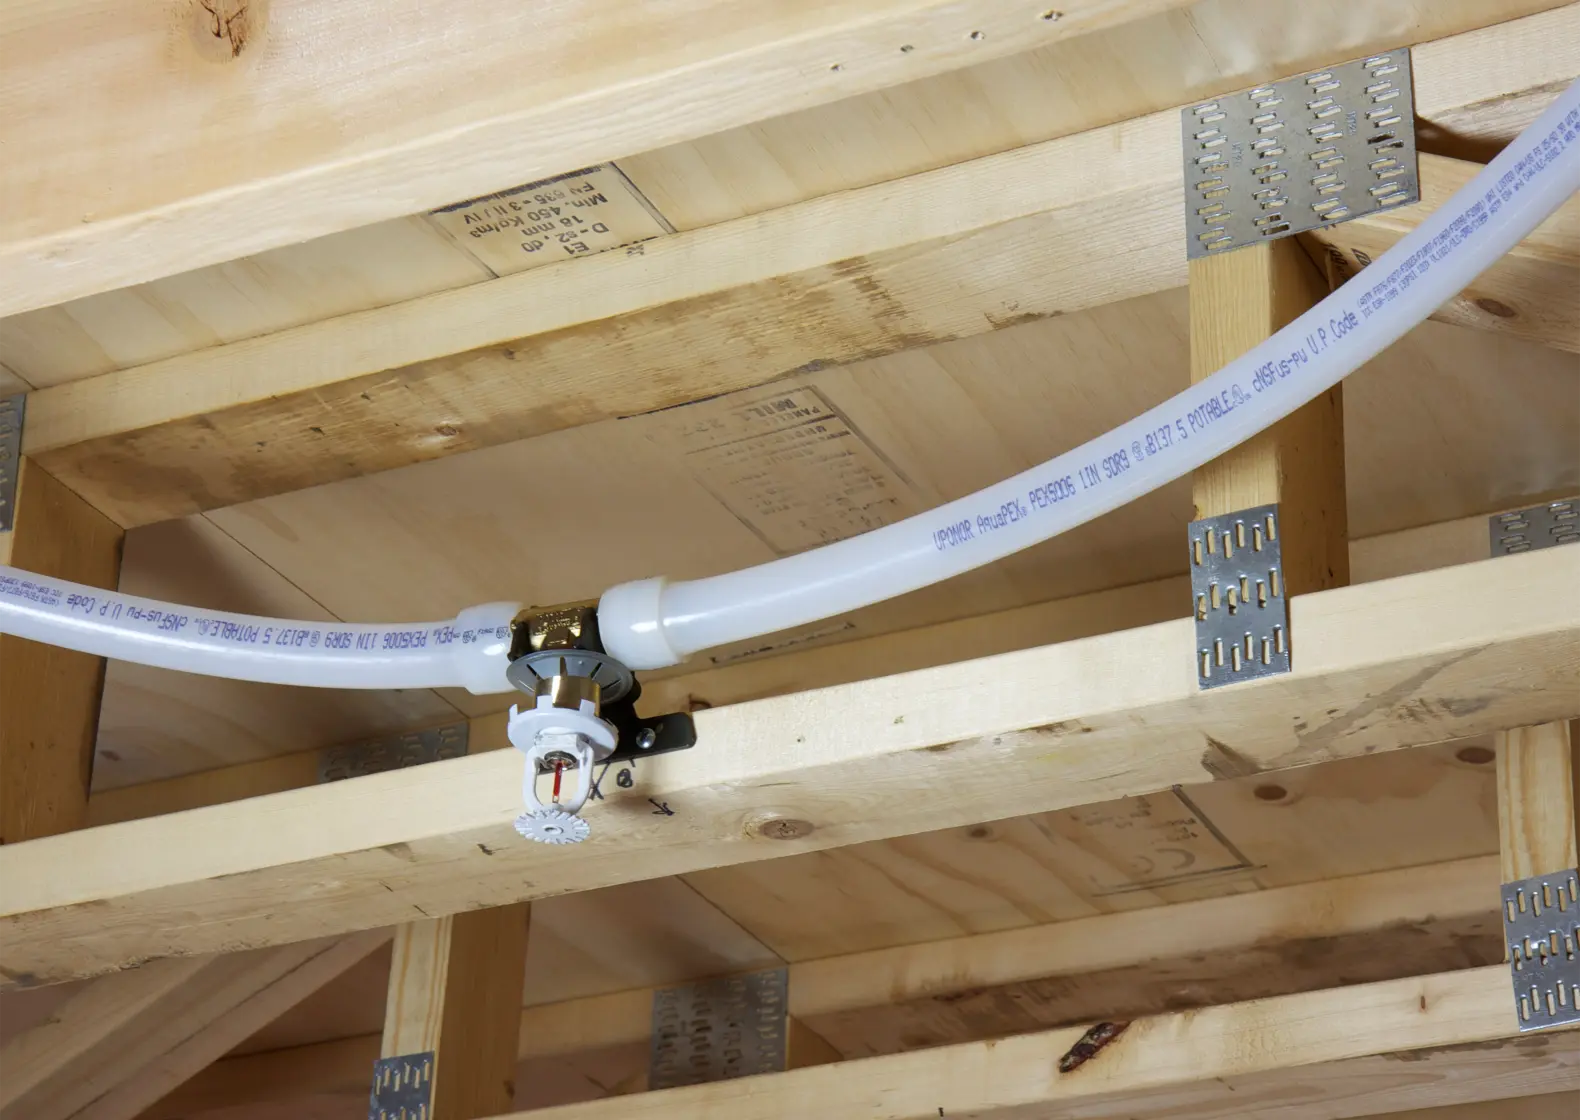 The Green Benefits of Home Fire Sprinklers